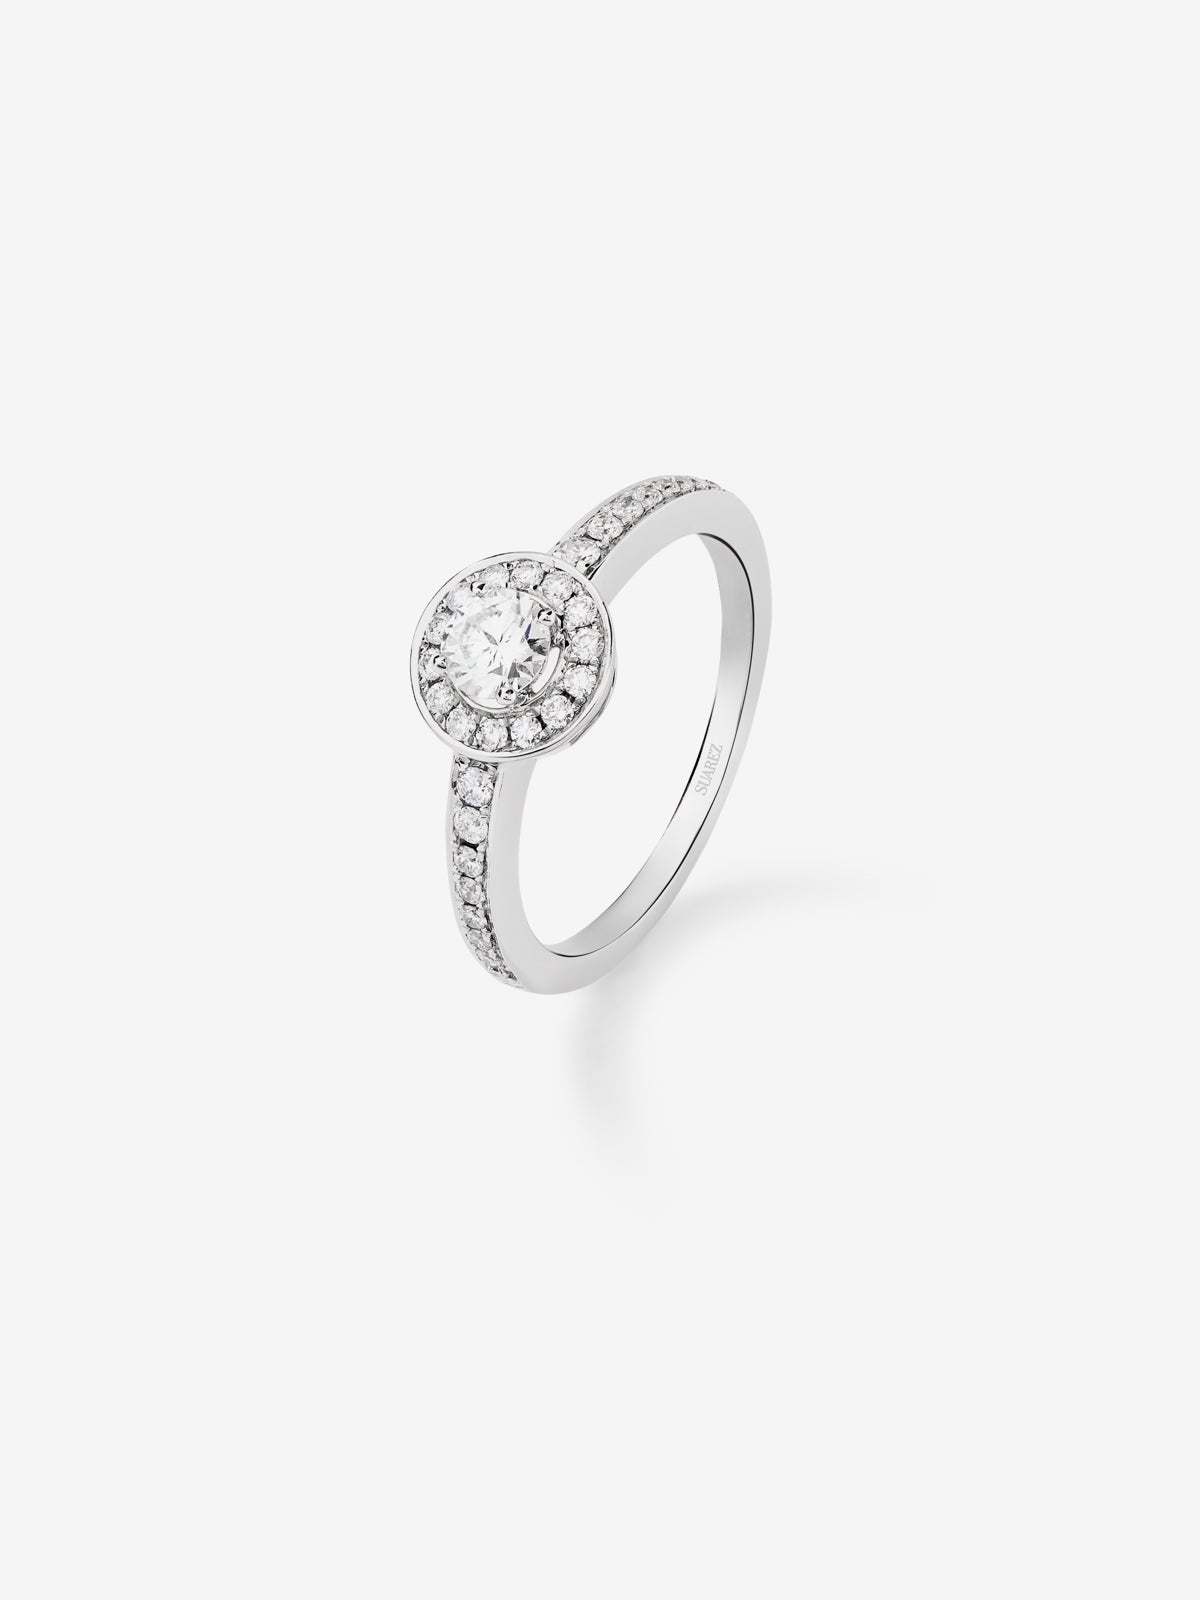 18K white gold solitaire ring with central brilliant-cut diamond of 0.15 cts and border and arm with 30 brilliant-cut diamonds with a total of 0.28 cts